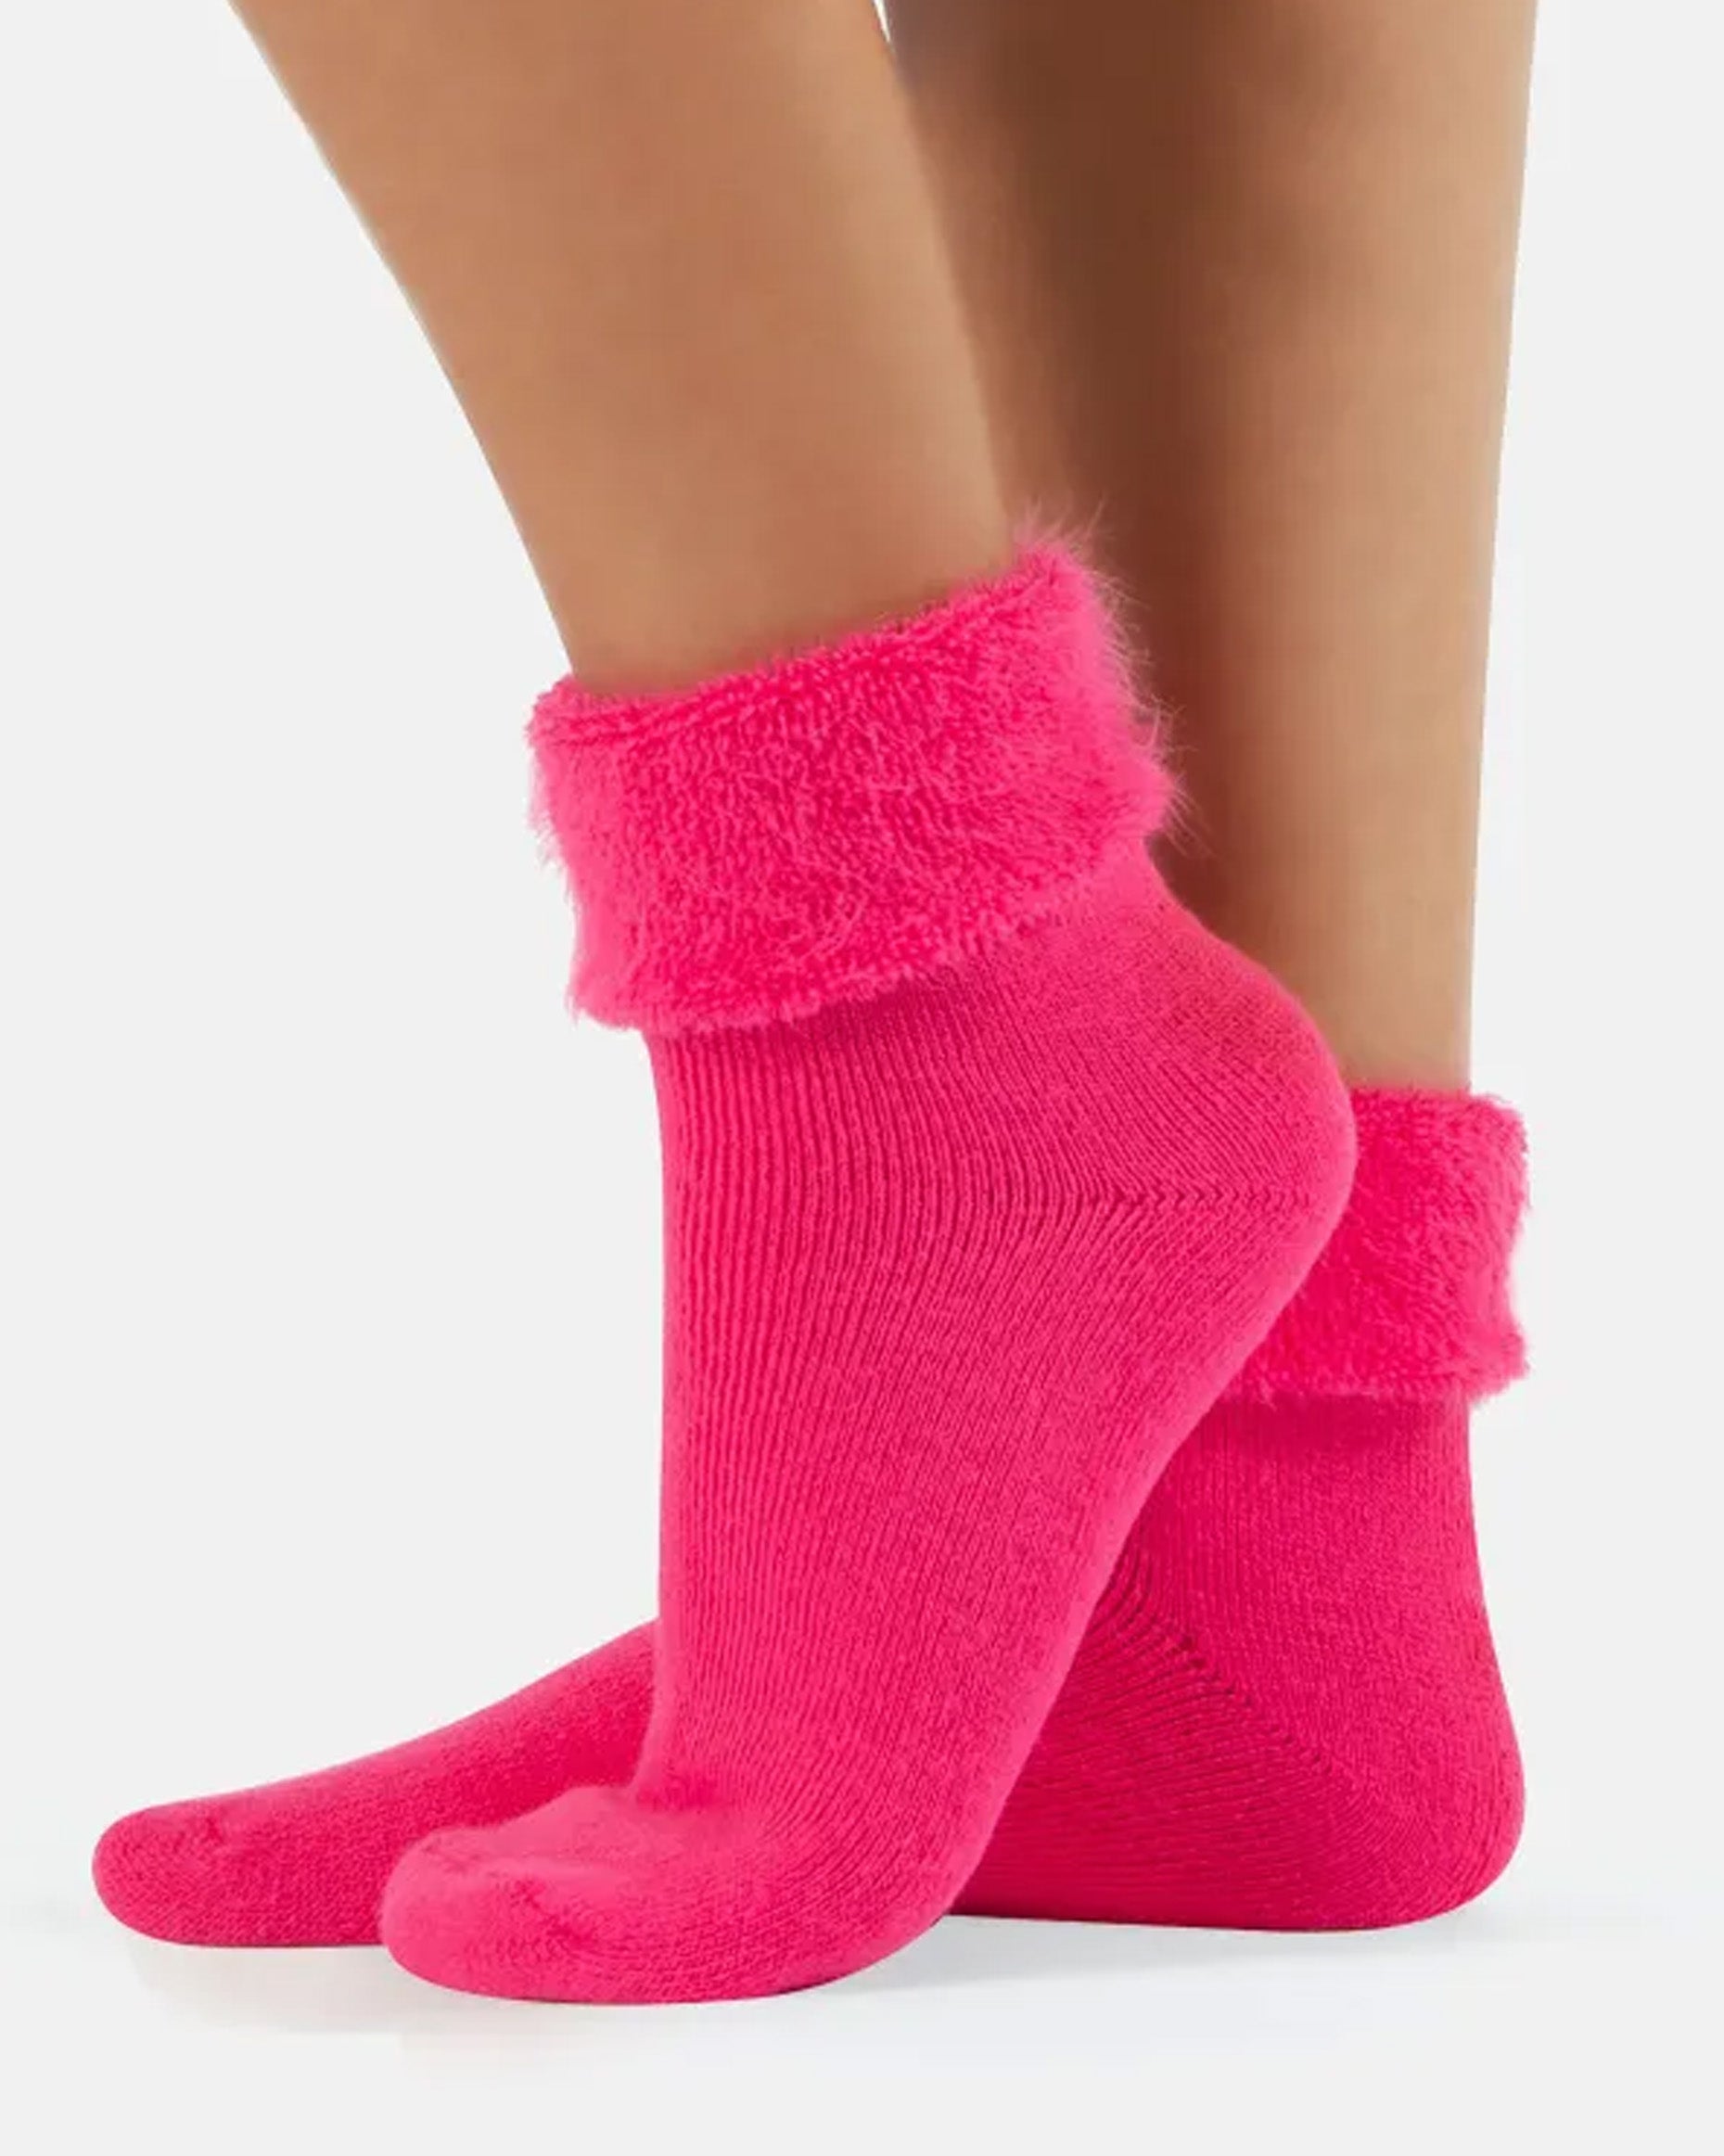 Calzitaly Angora Touch Socks - Bright neon pink thick and warm acrylic socks with a fluffy angora type terry lining with a turned down cuff.